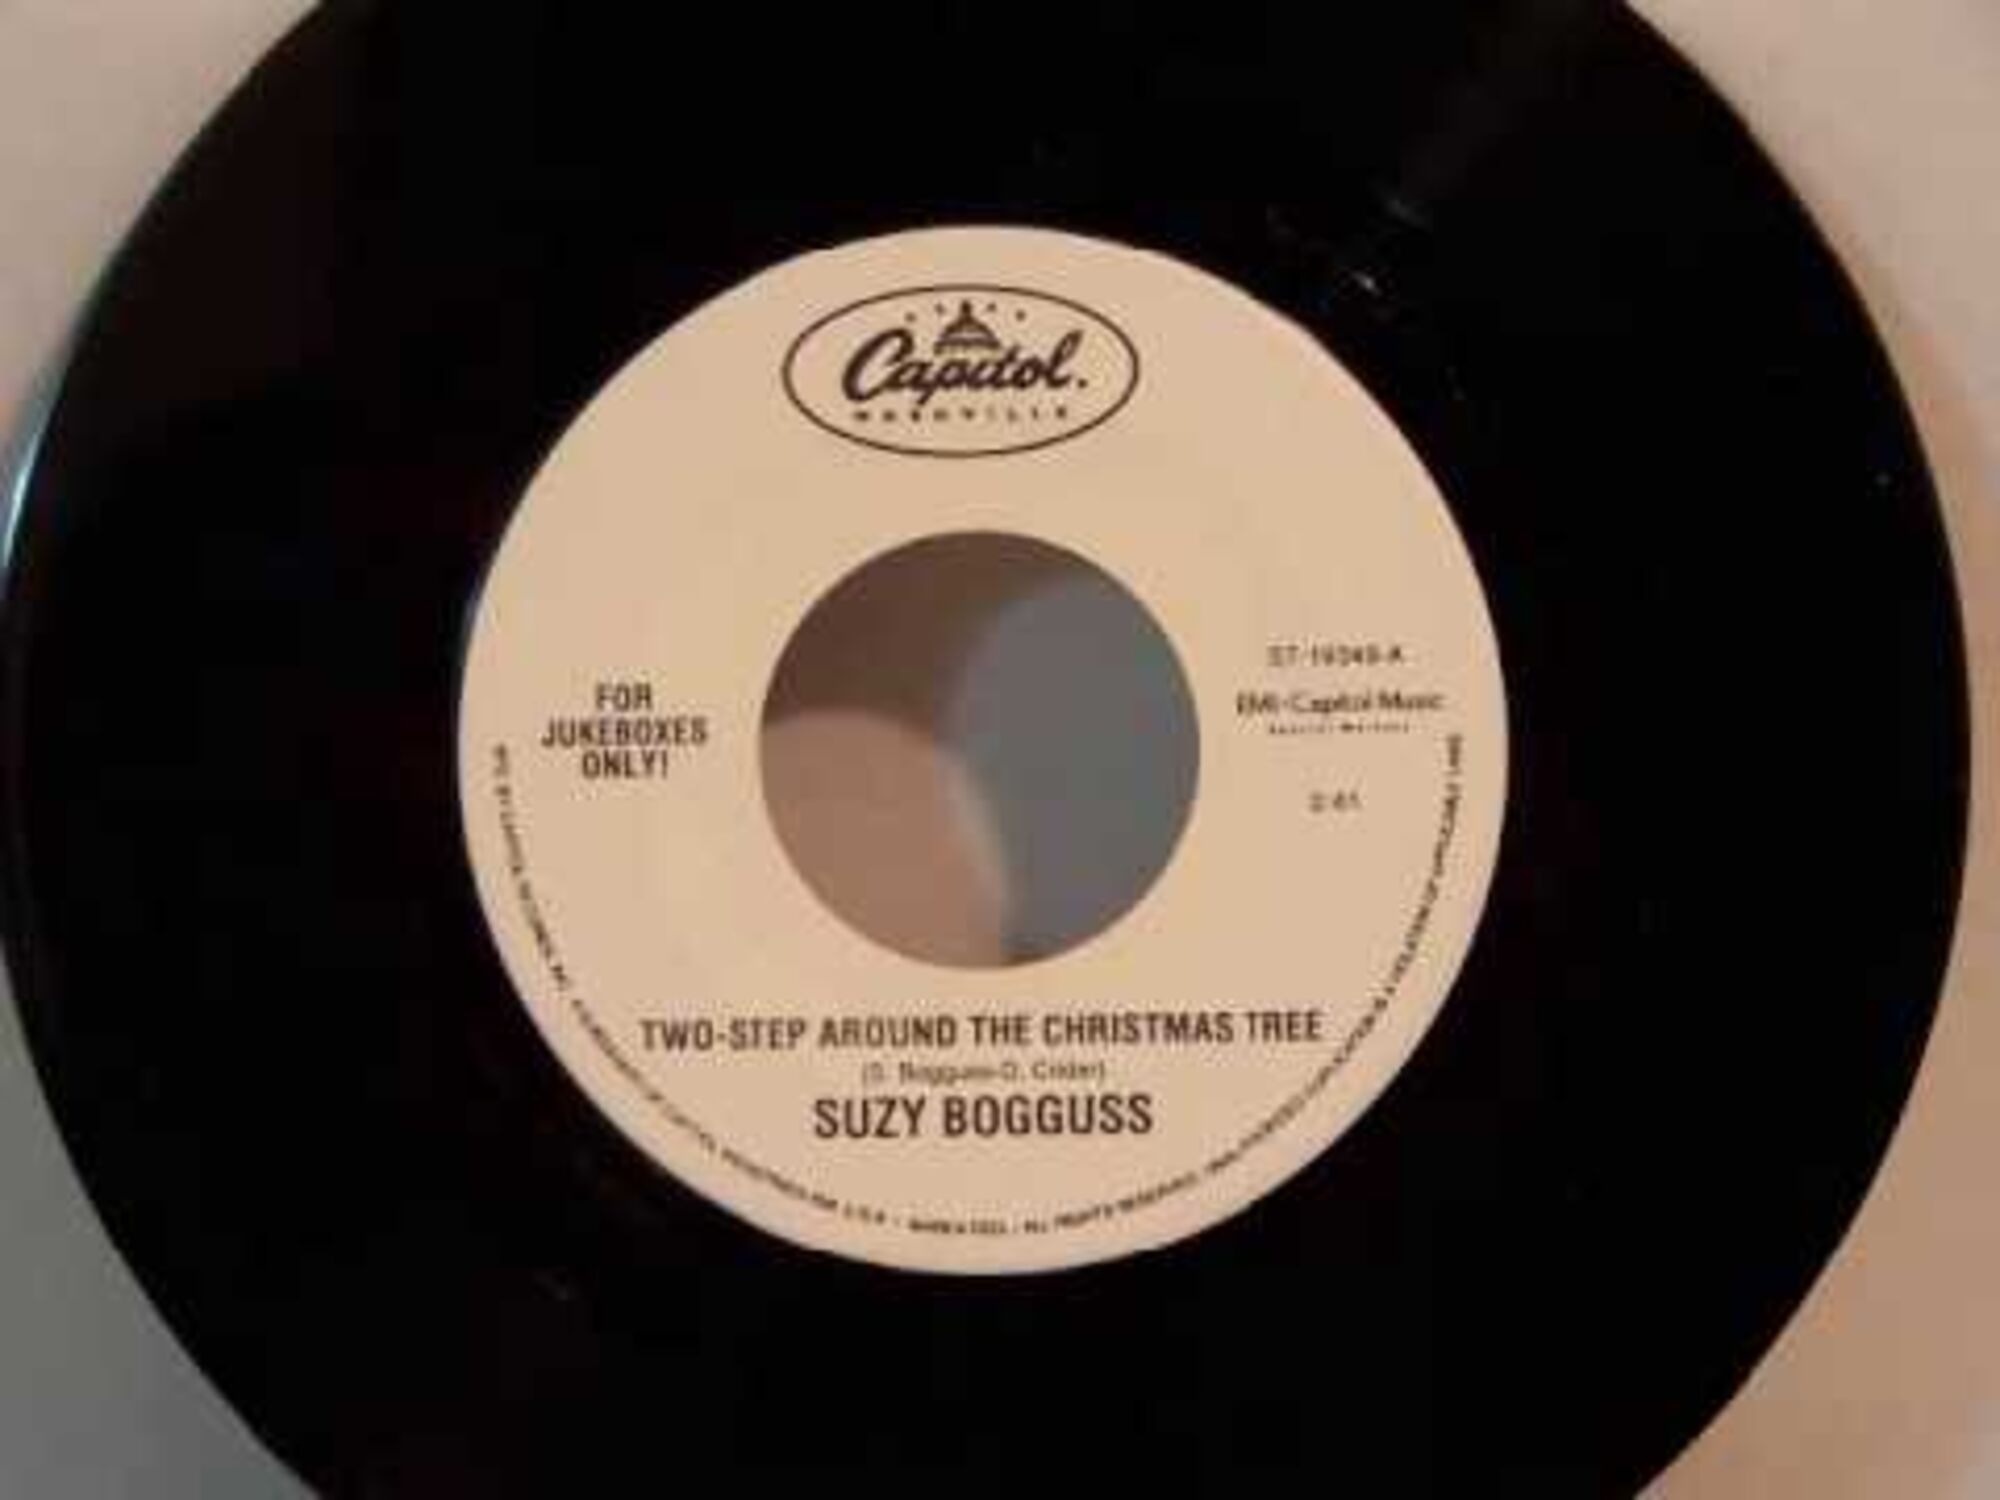 Suzy Bogguss - Two-Step 'Round The Christmas Tree